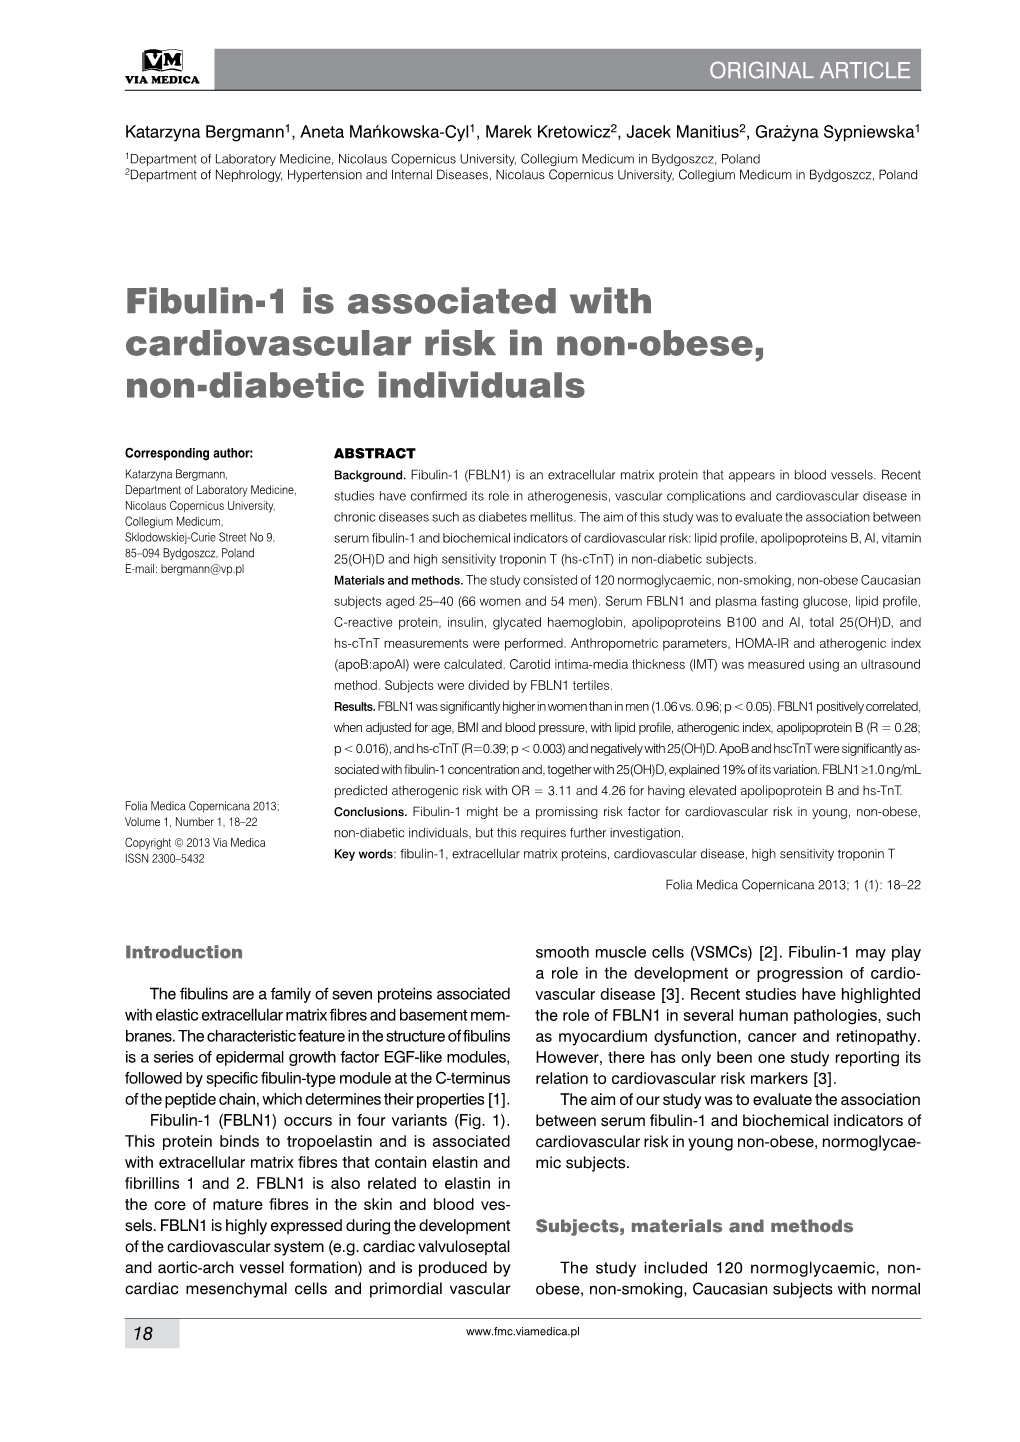 Fibulin-1 Is Associated with Cardiovascular Risk in Non-Obese, Non-Diabetic Individuals